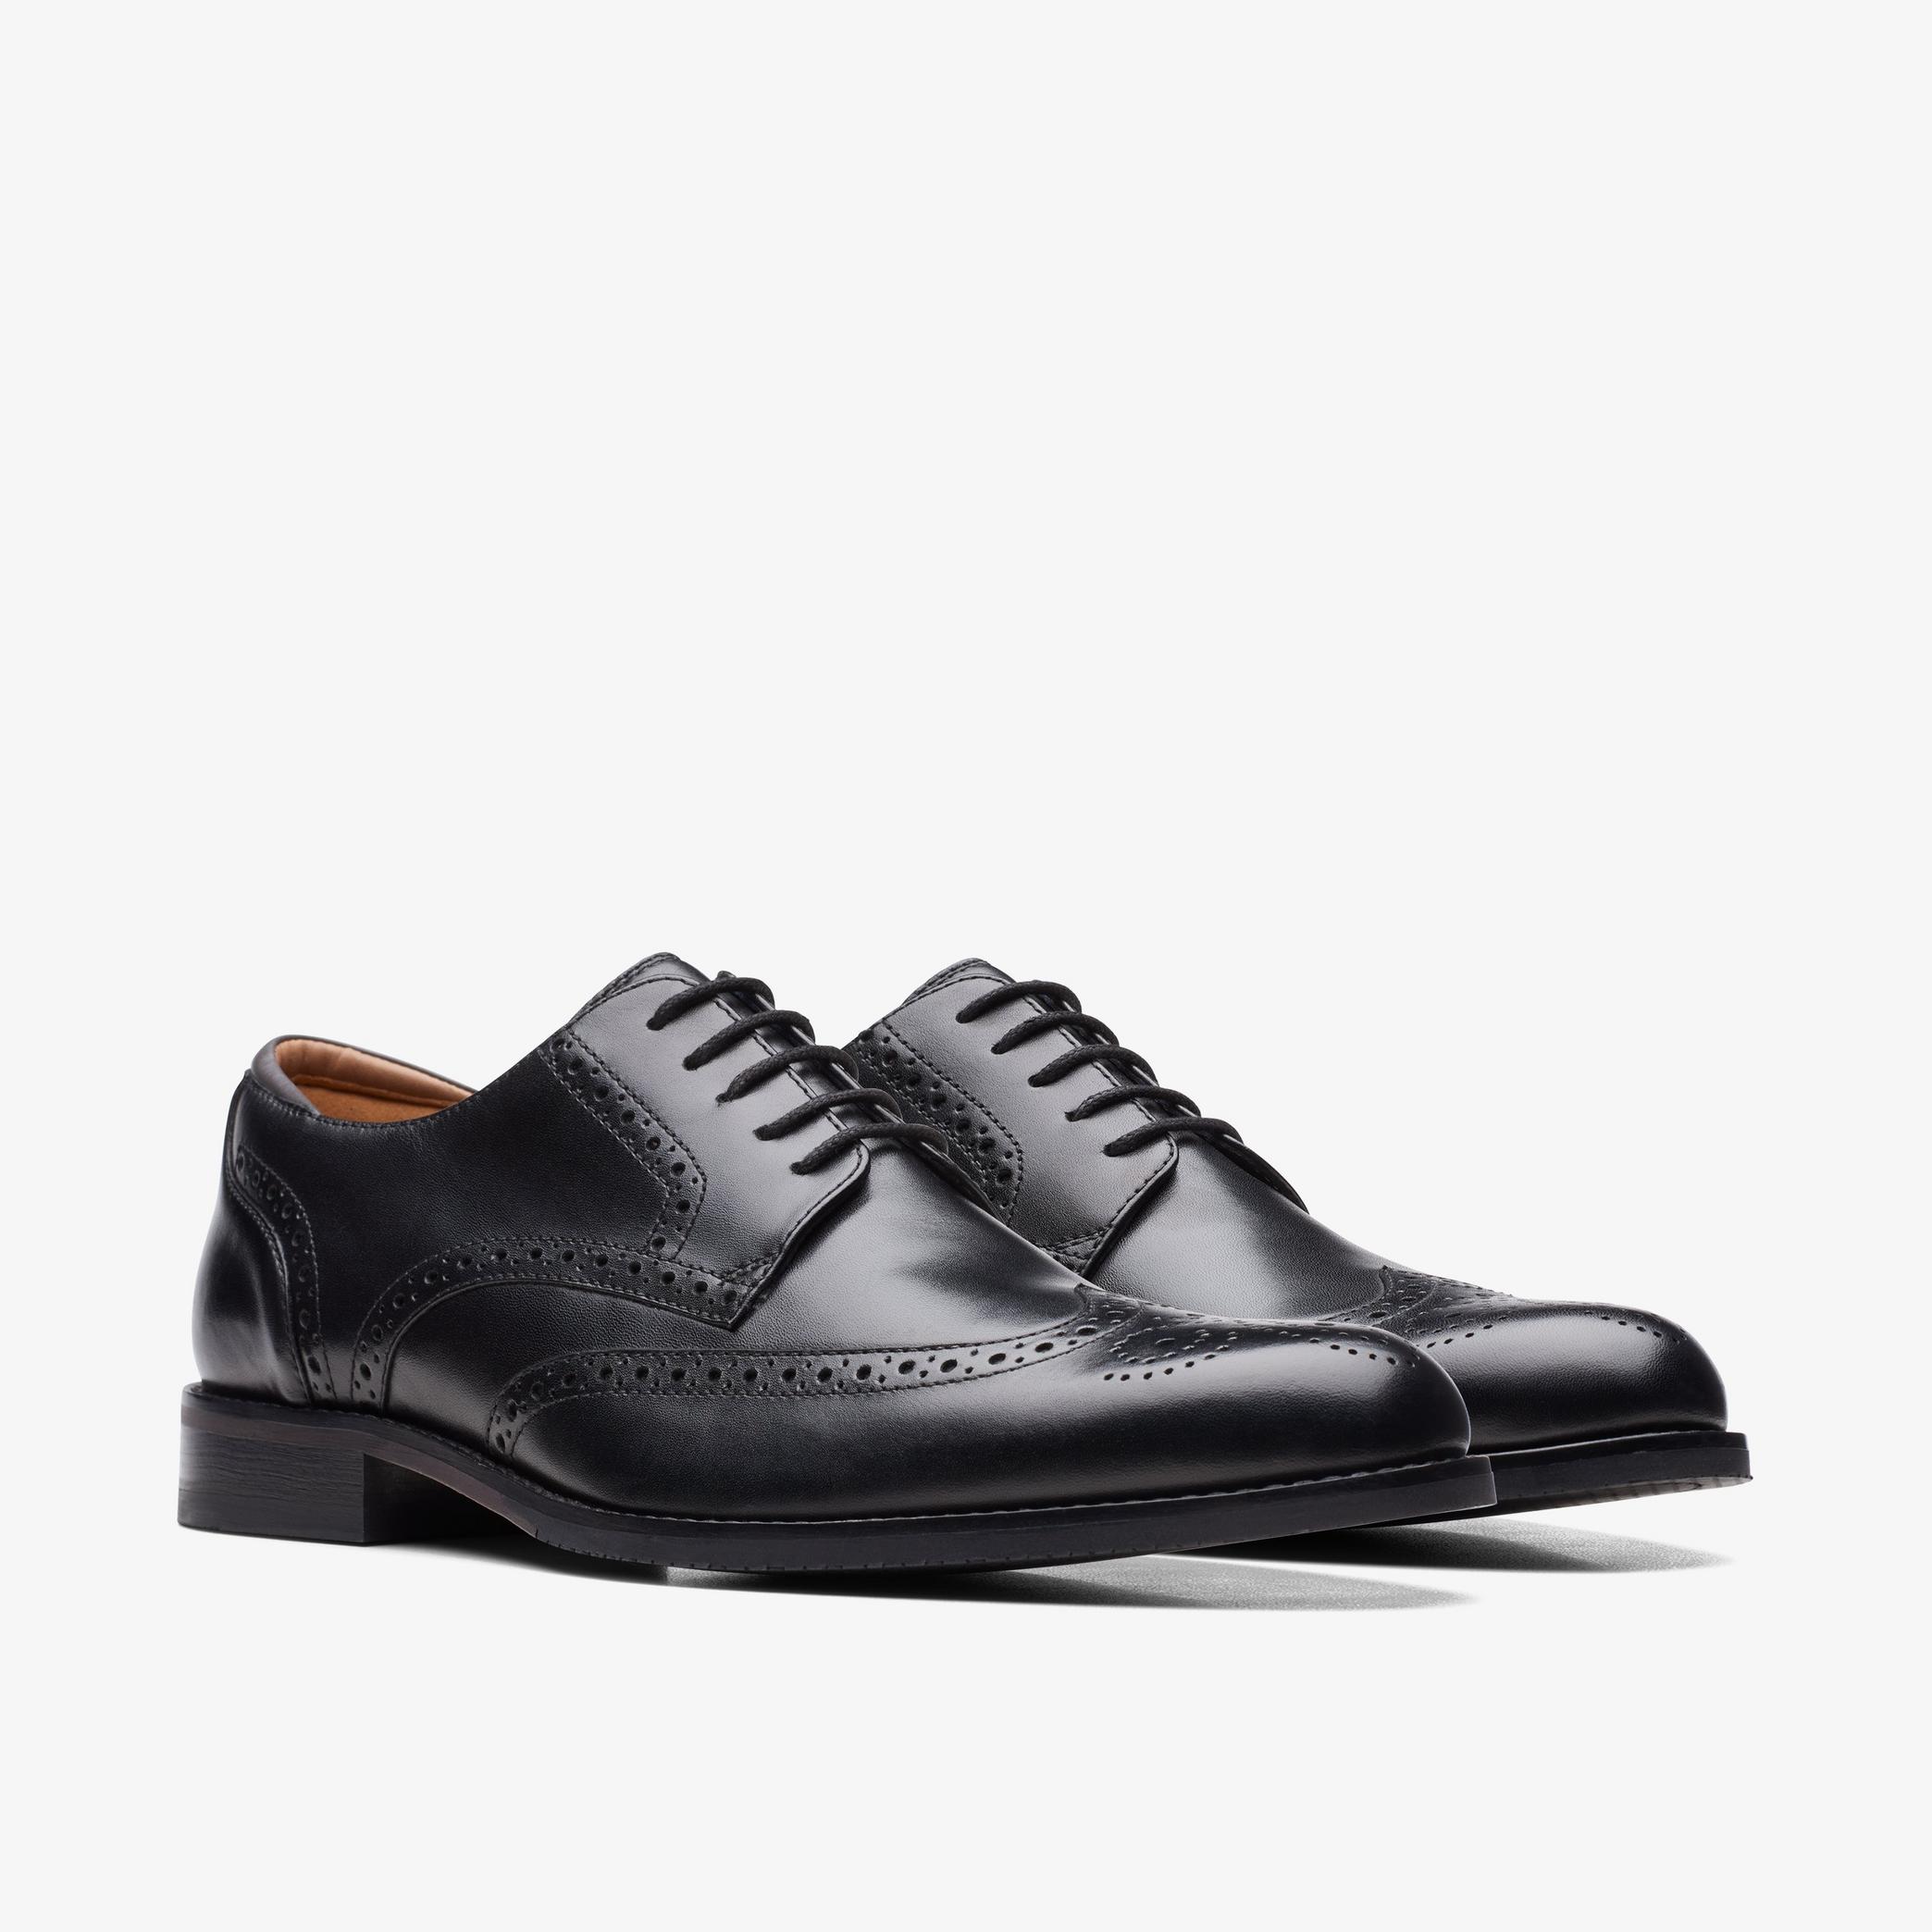 Craft Arlo Limit Black Leather Oxford Shoes, view 4 of 6